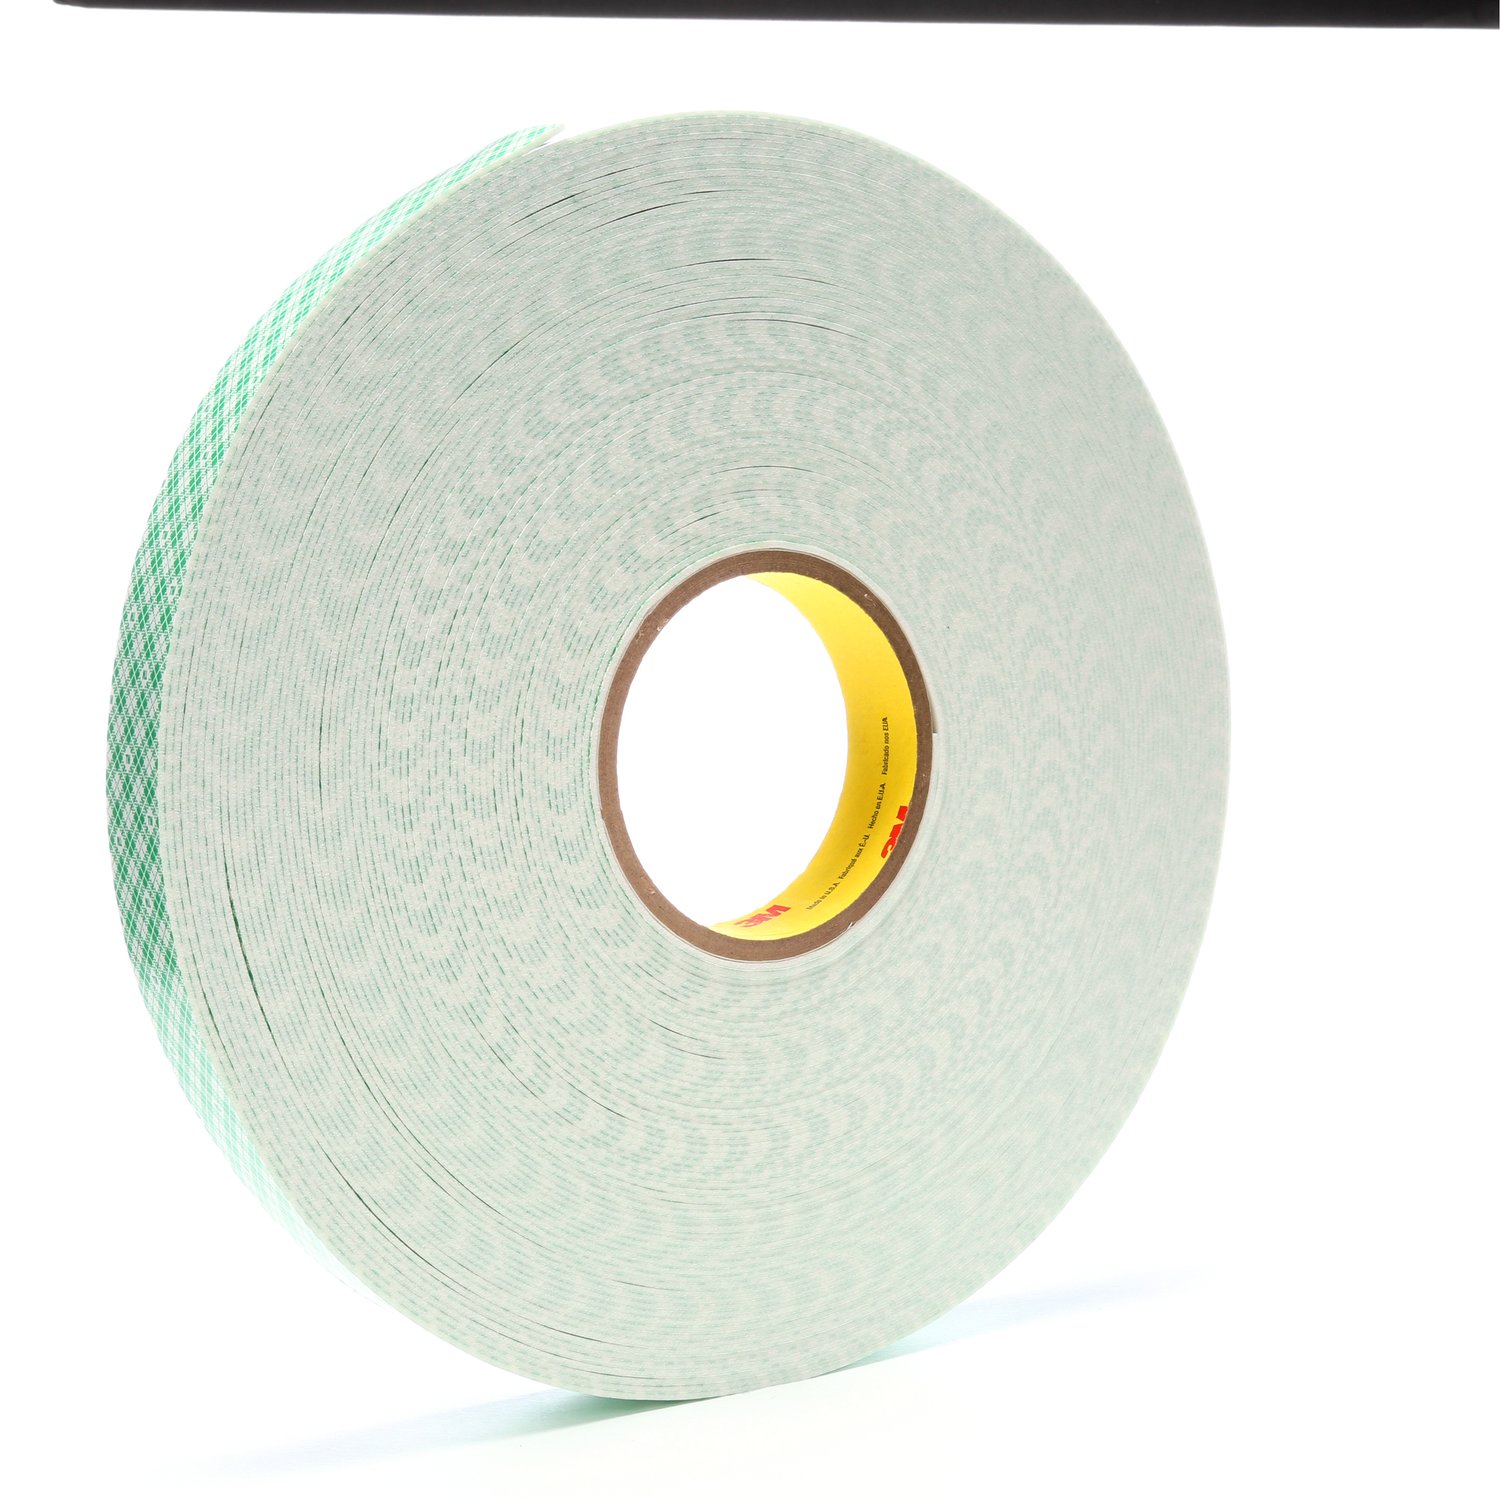 7000048480 - 3M Double Coated Urethane Foam Tape 4016, Off White, 1 in x 36 yd, 62
mil, 9 rolls per case